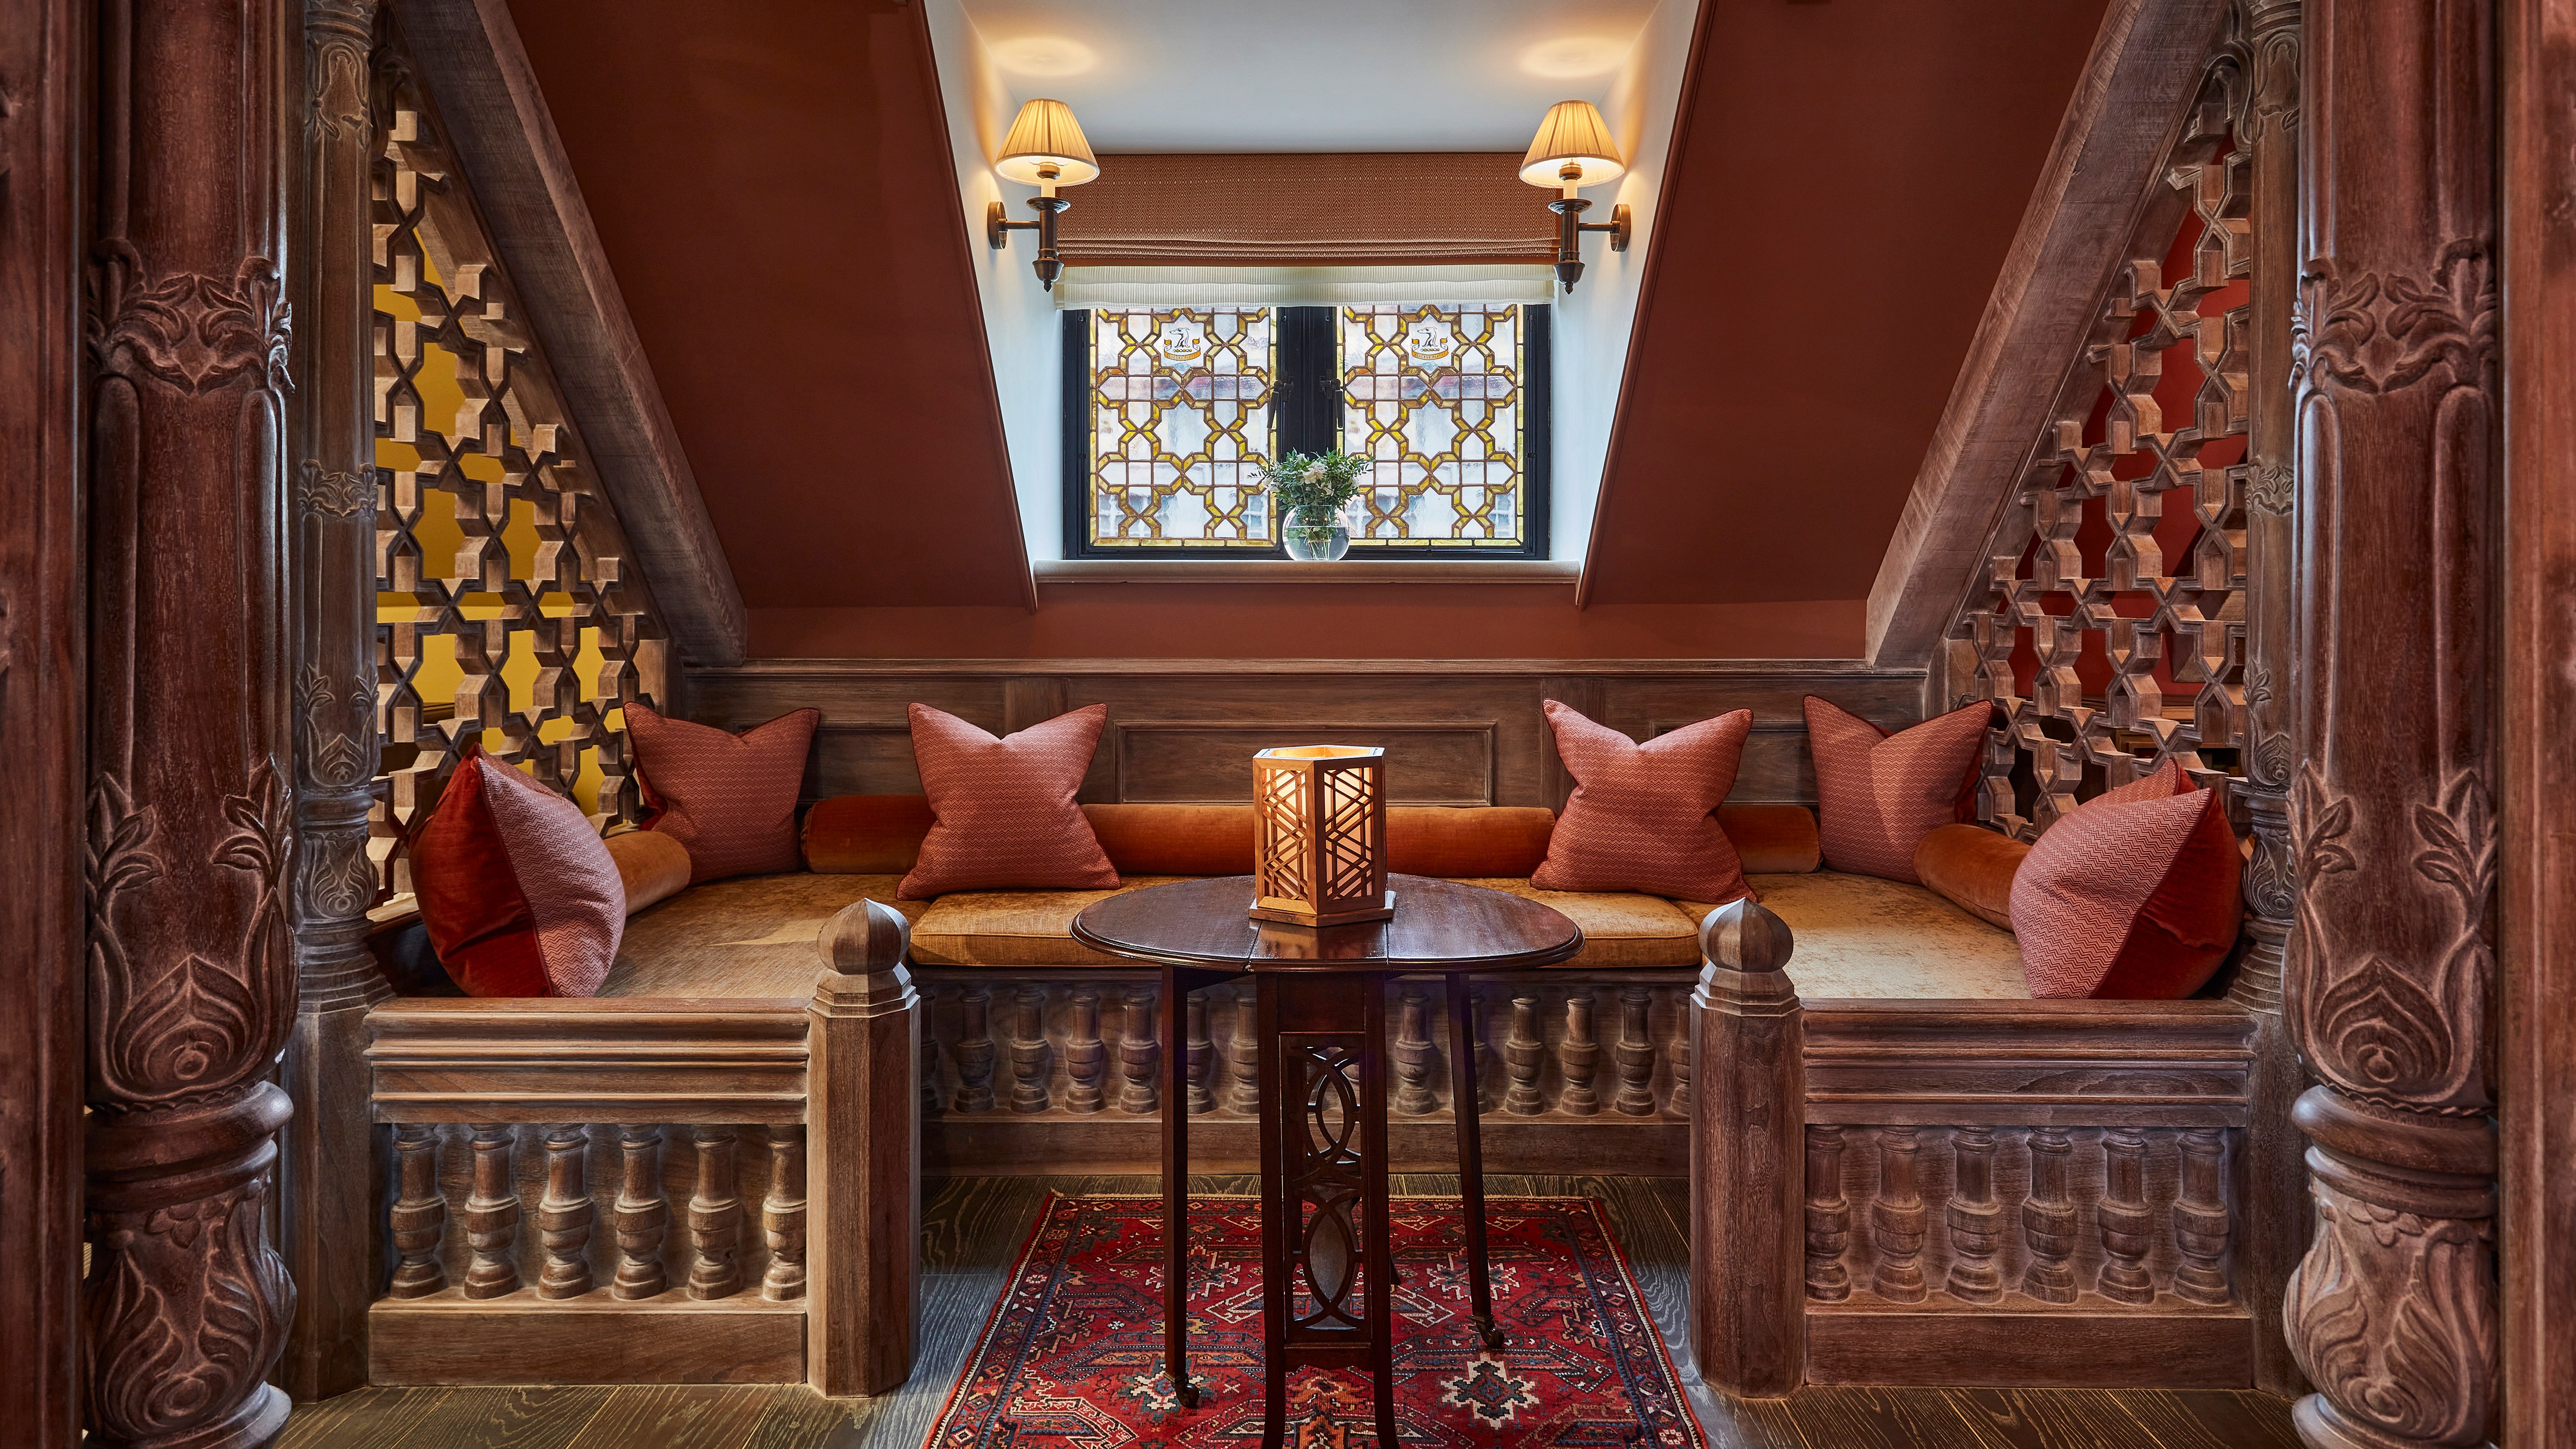 The King’s Lodge at the Connaught has been designed according to principles of sacred geometry